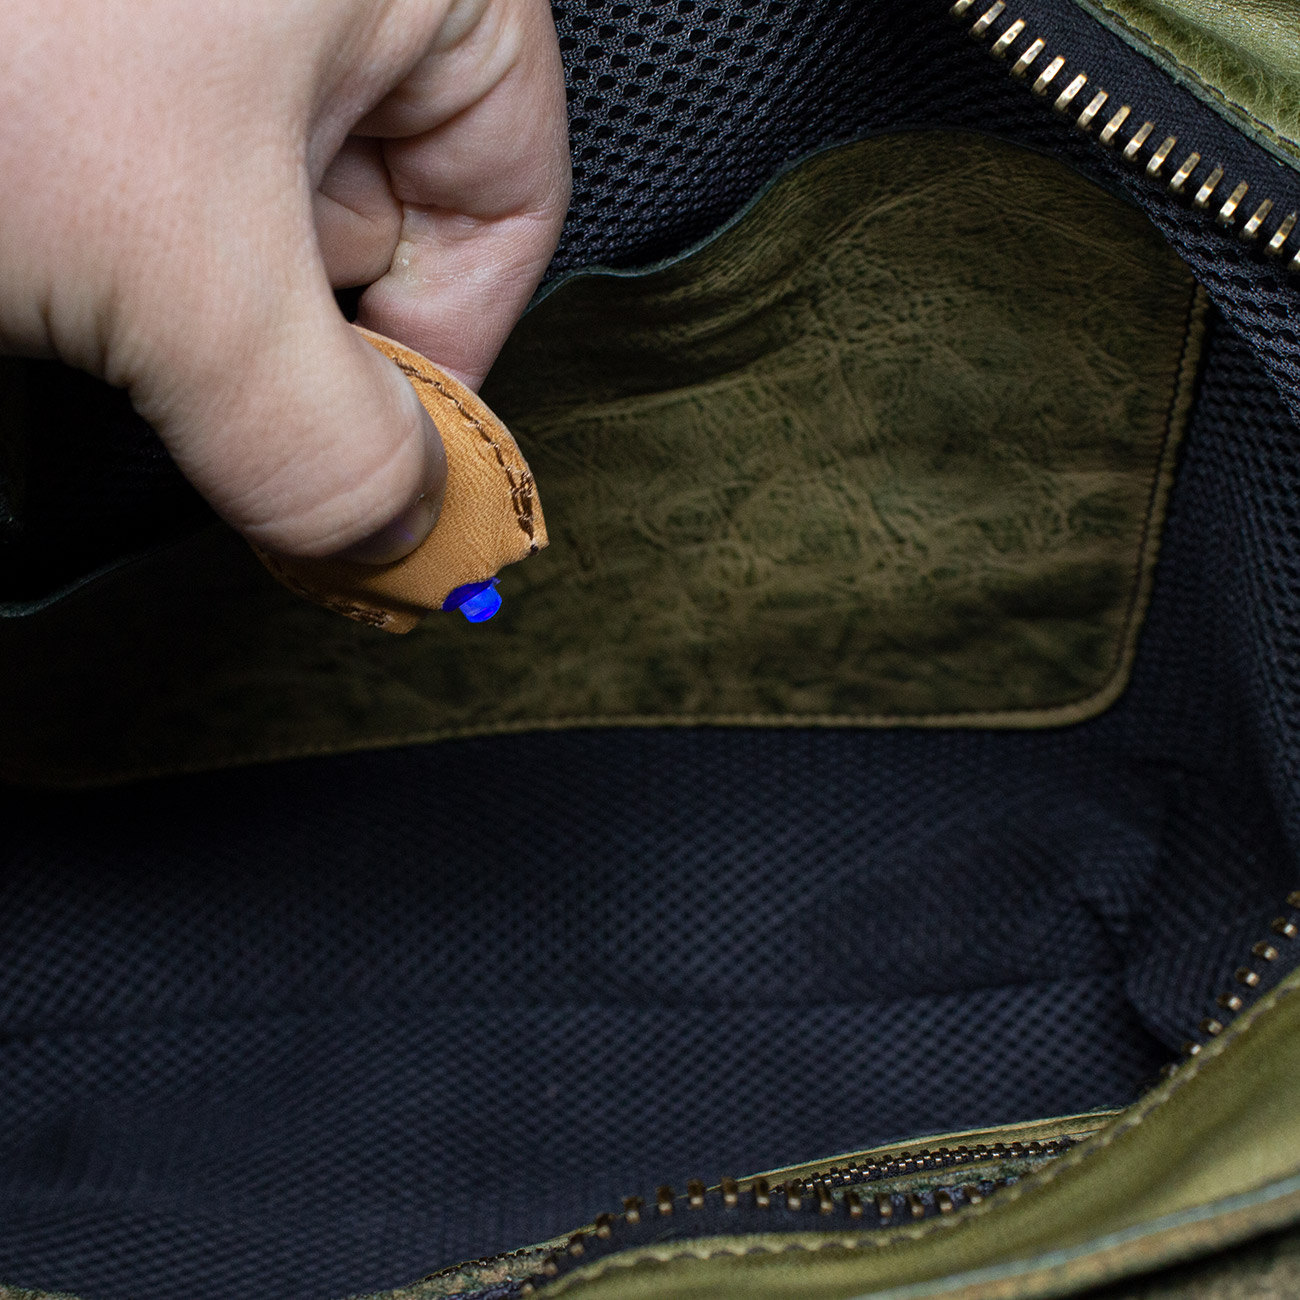 Equipped with three internal pockets, two open and one with zip closure.